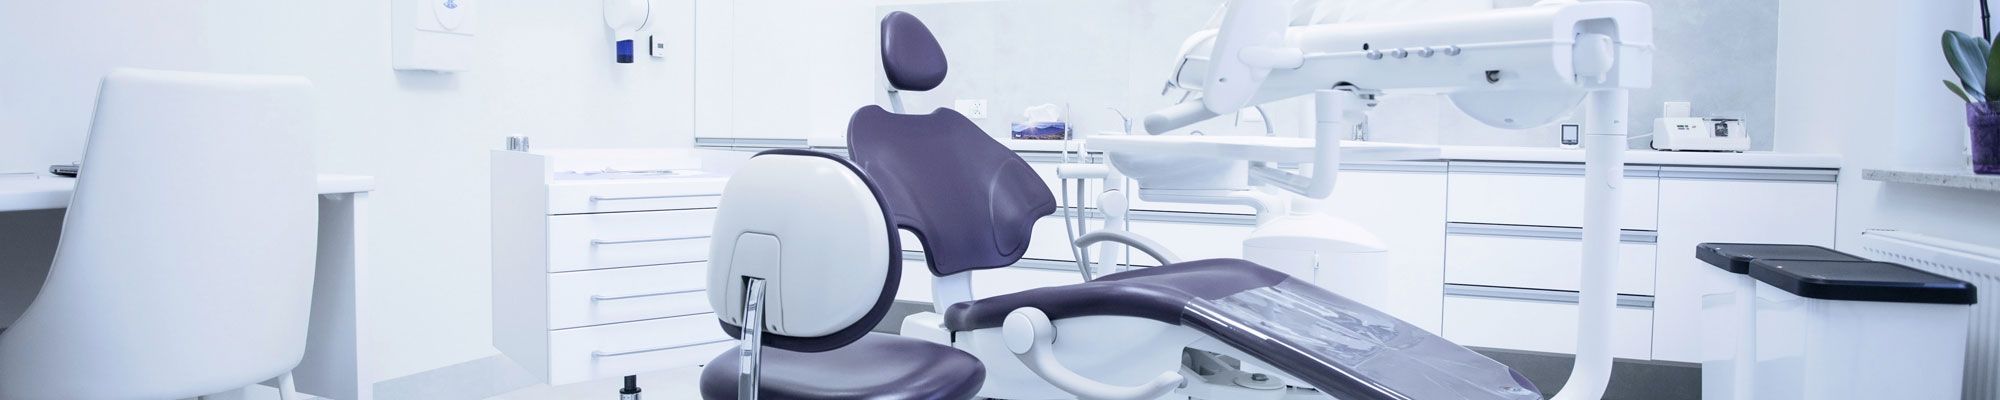 Dentists chair in treatment room